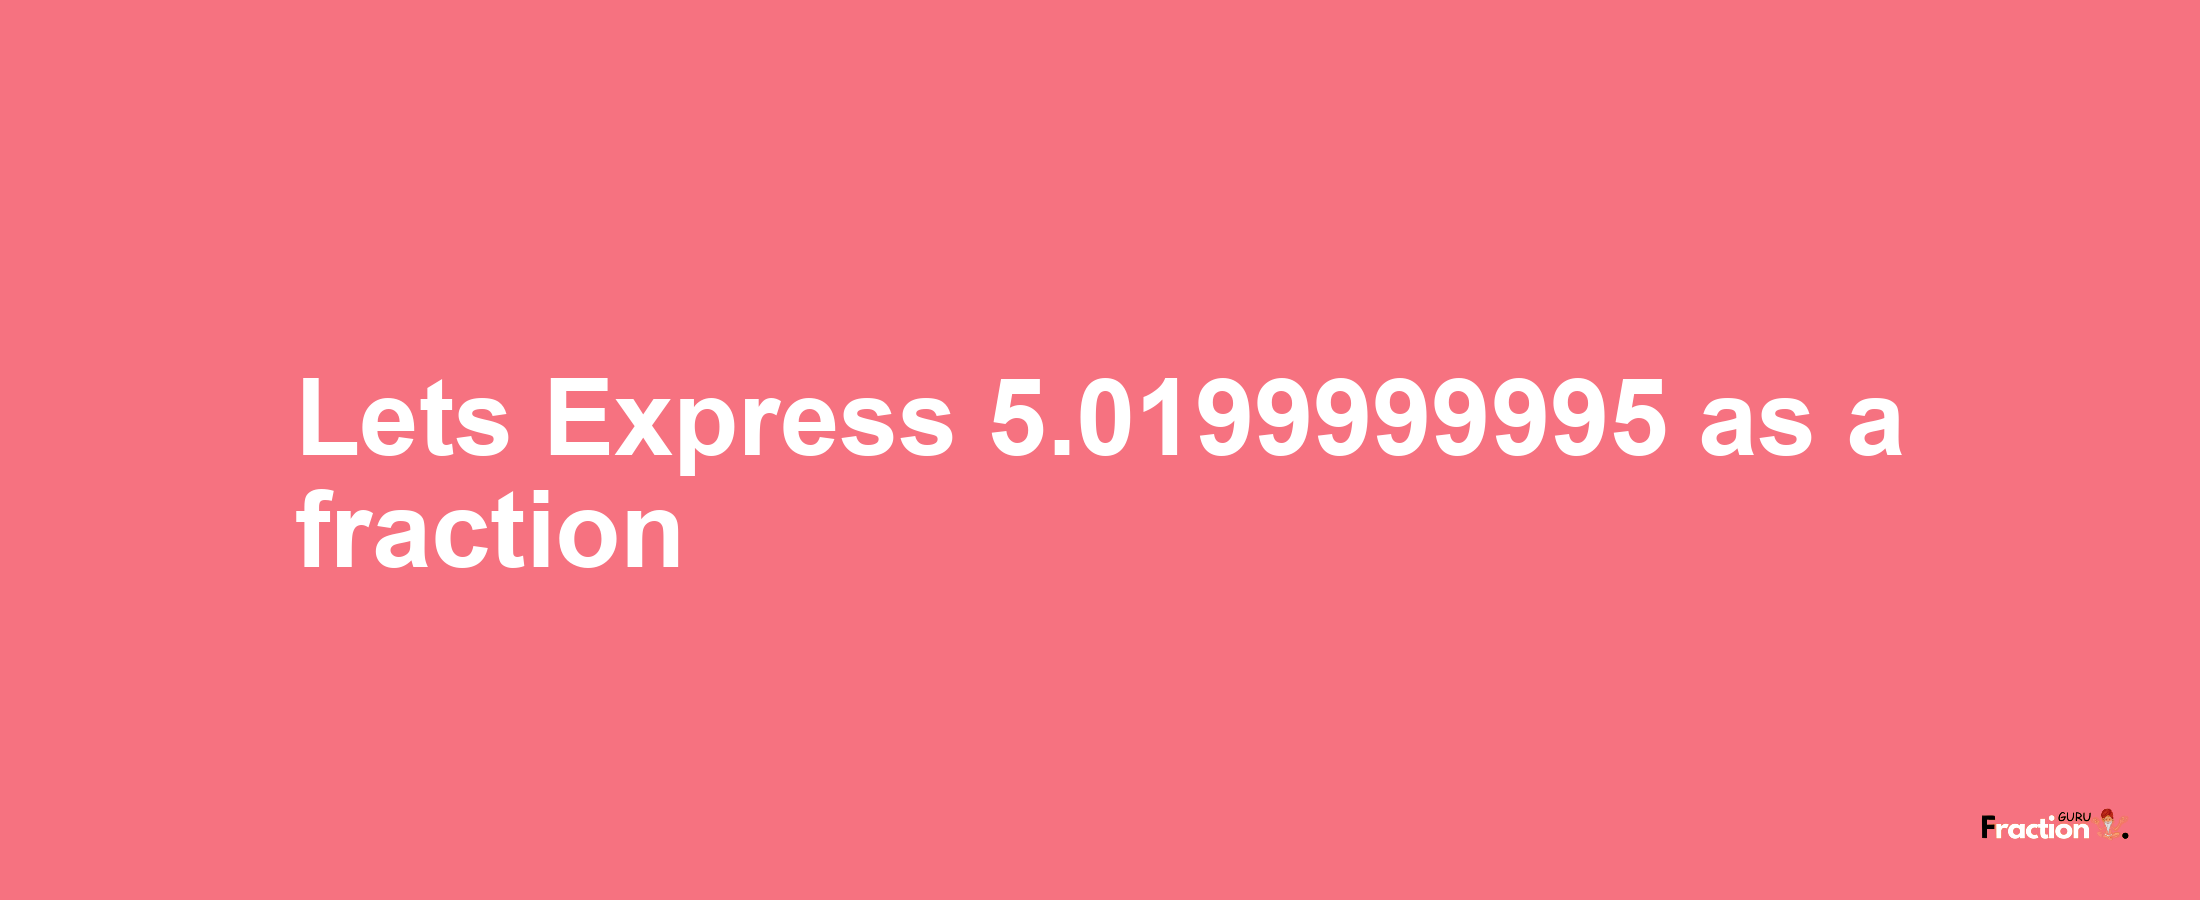 Lets Express 5.0199999995 as afraction